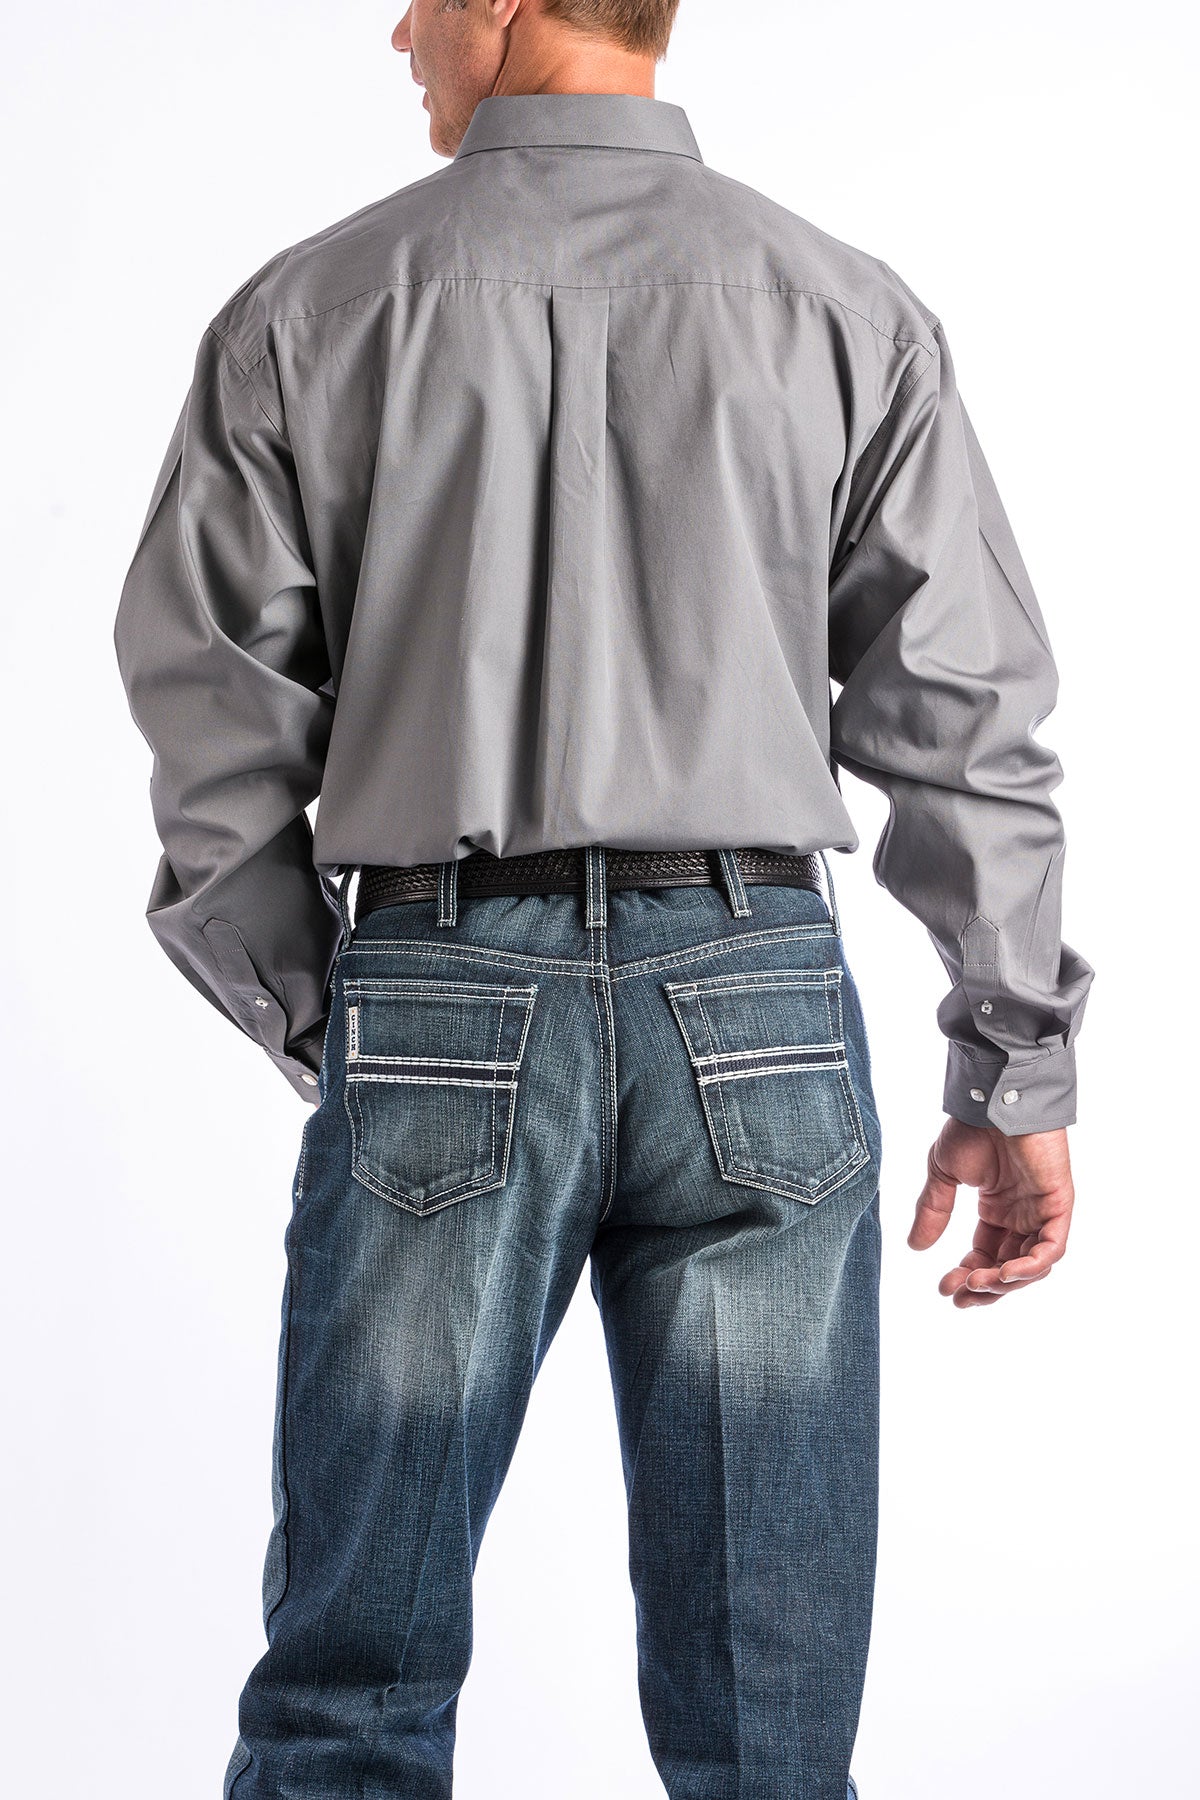 Cinch Men's Classic Fit Solid Gray Western Shirt